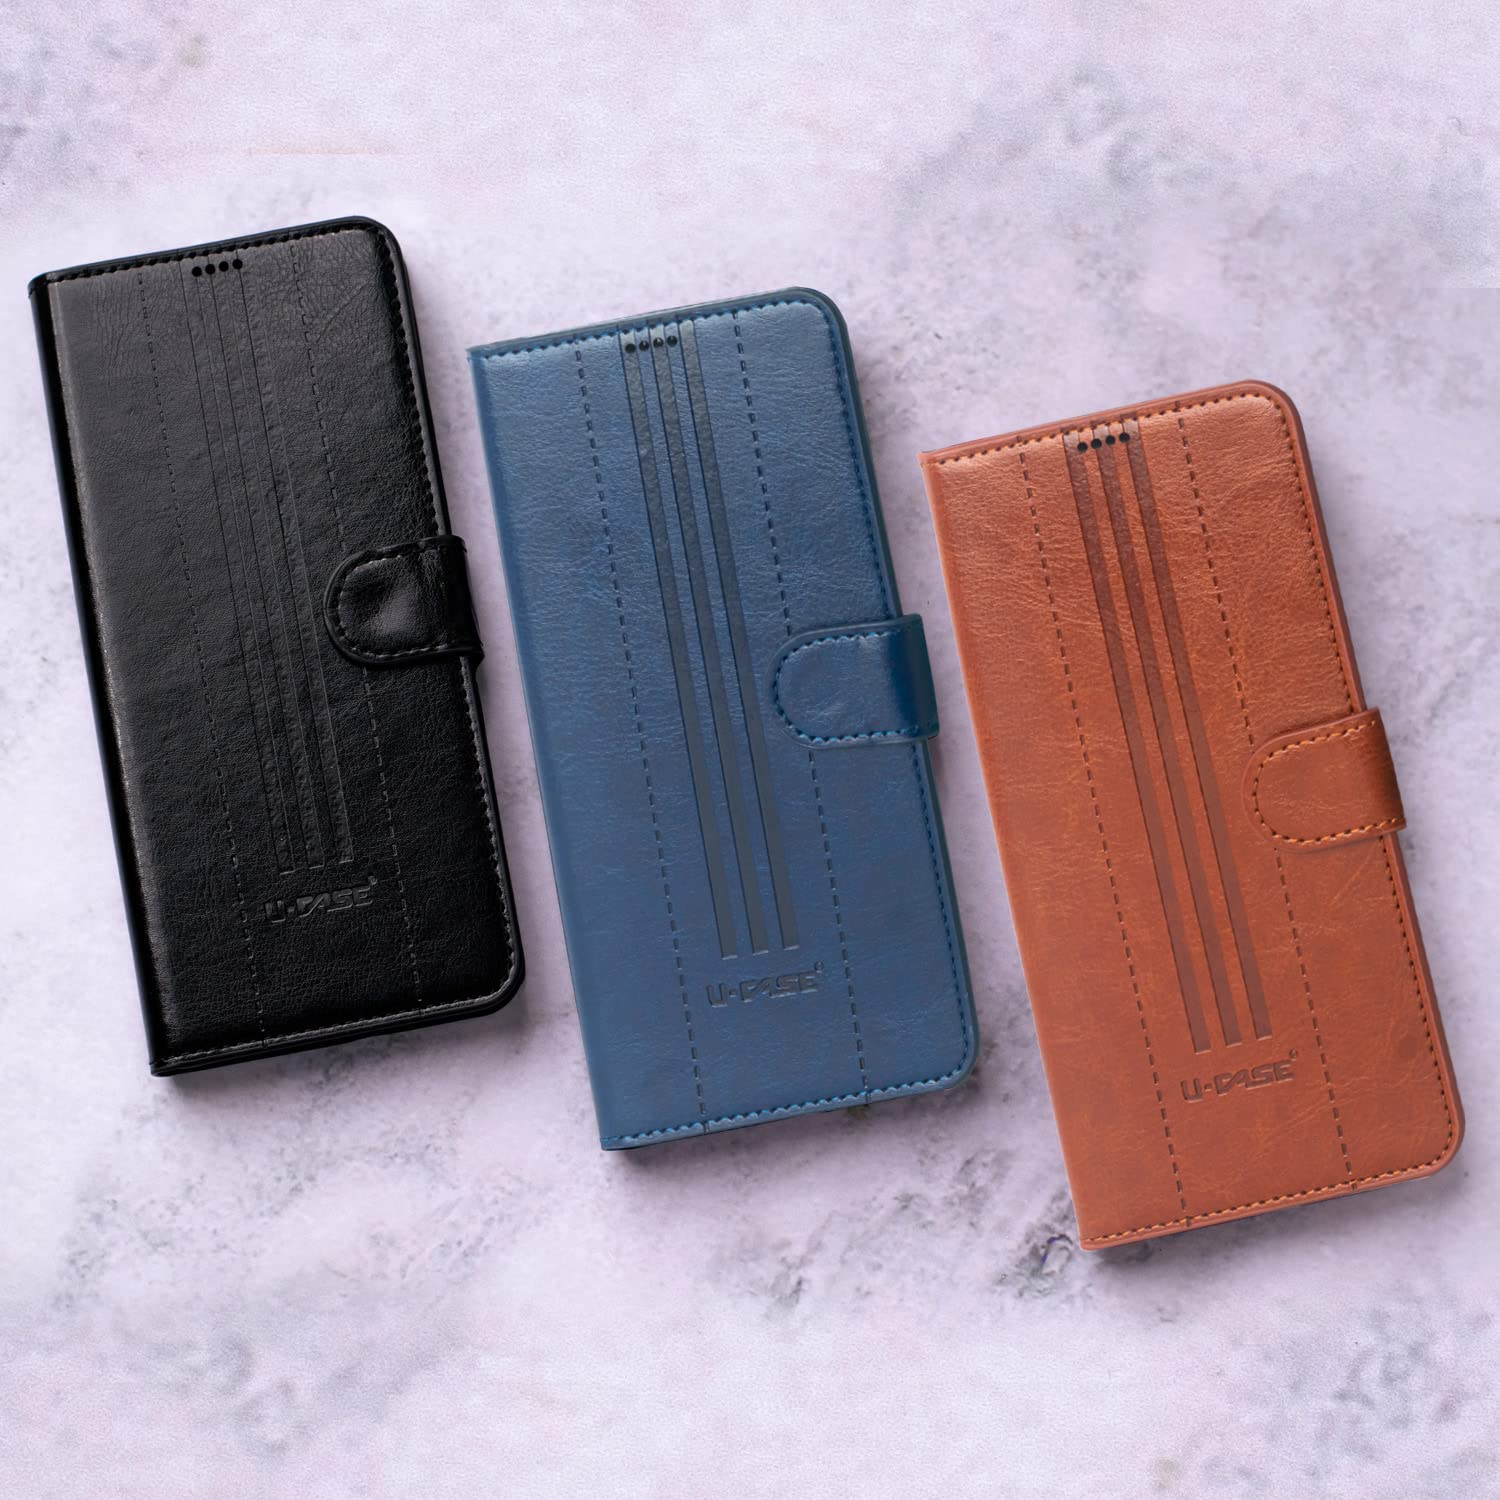 U-CASE Flip Cover for Oppo F19 / Oppo F19s Vegan Foldable Stand & Pocket Magnetic Closure colors